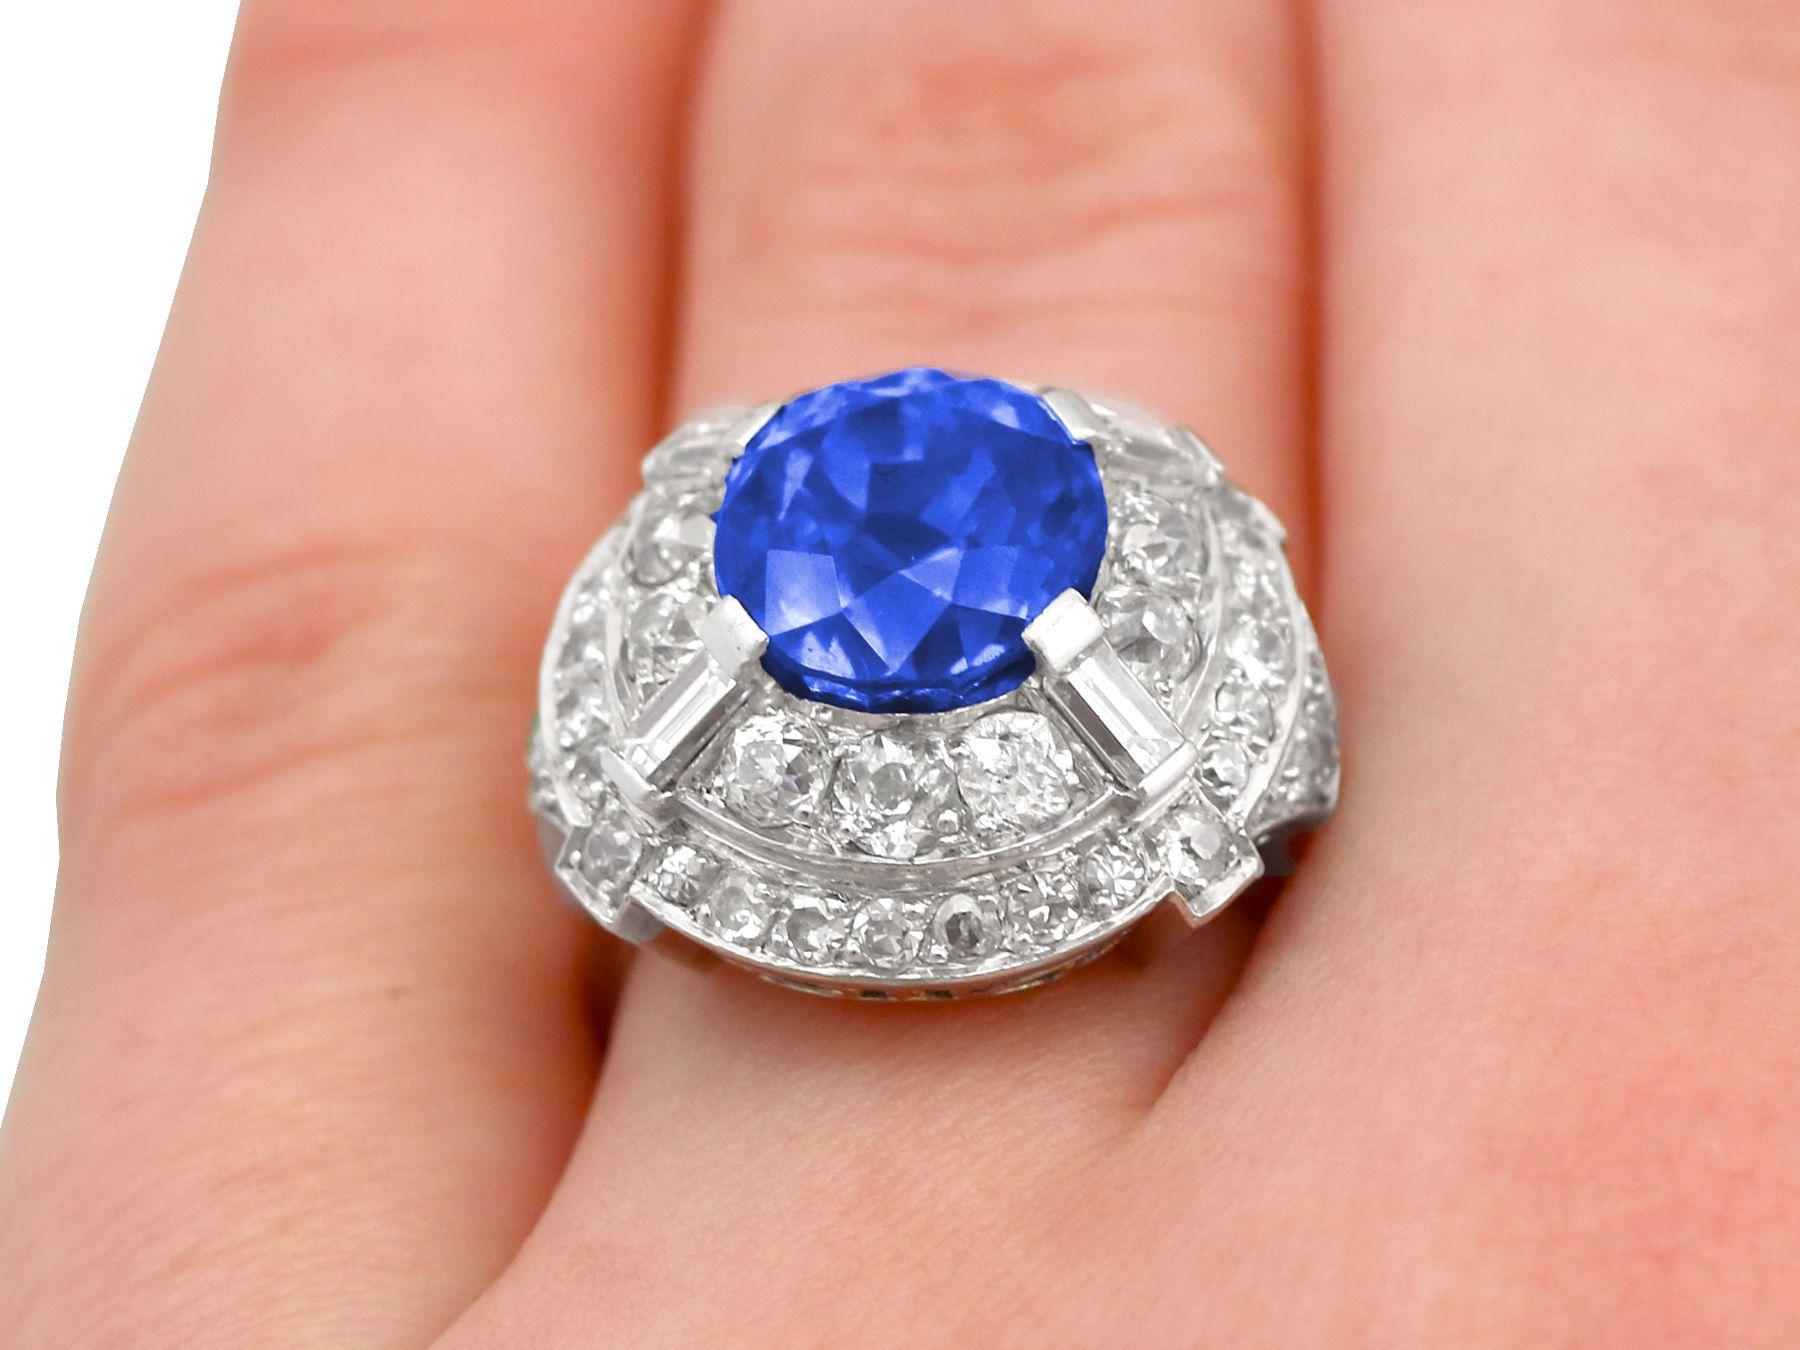 8.80 Carat Ceylon Sapphire and 2.68 Carat Diamond Cocktail Ring in White Gold For Sale 6